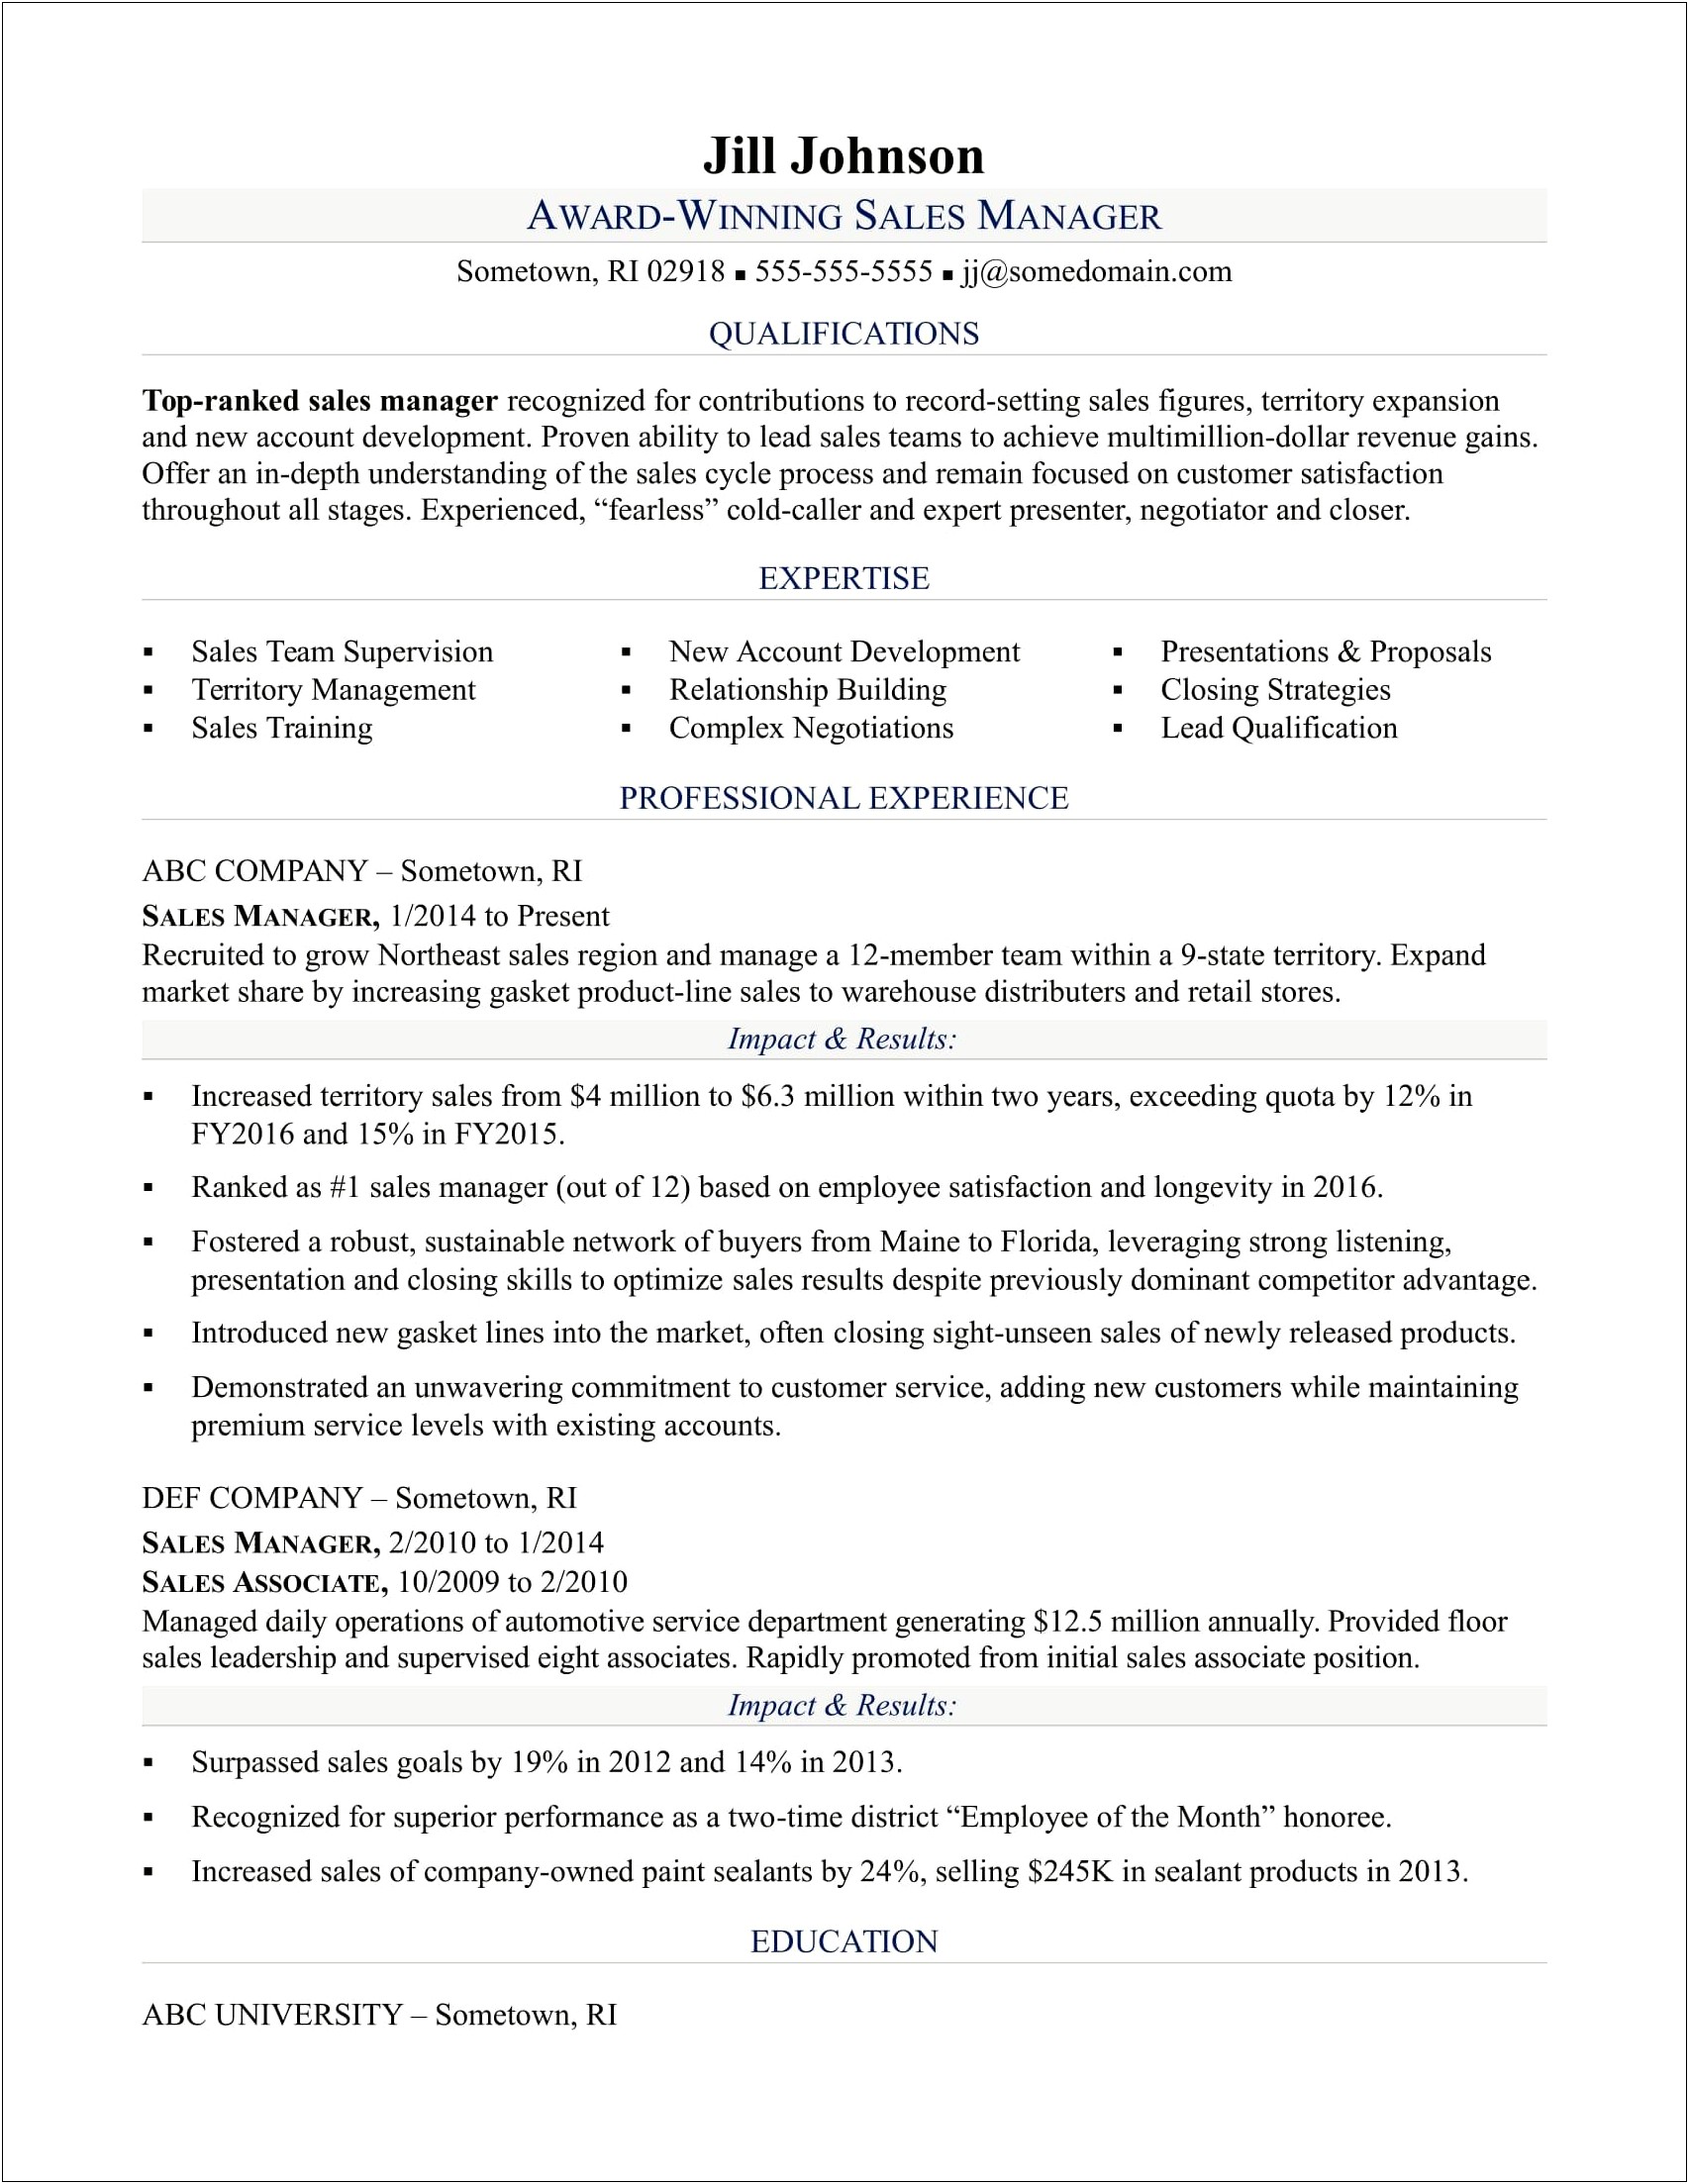 Resume For Area Sales Manager In Retail